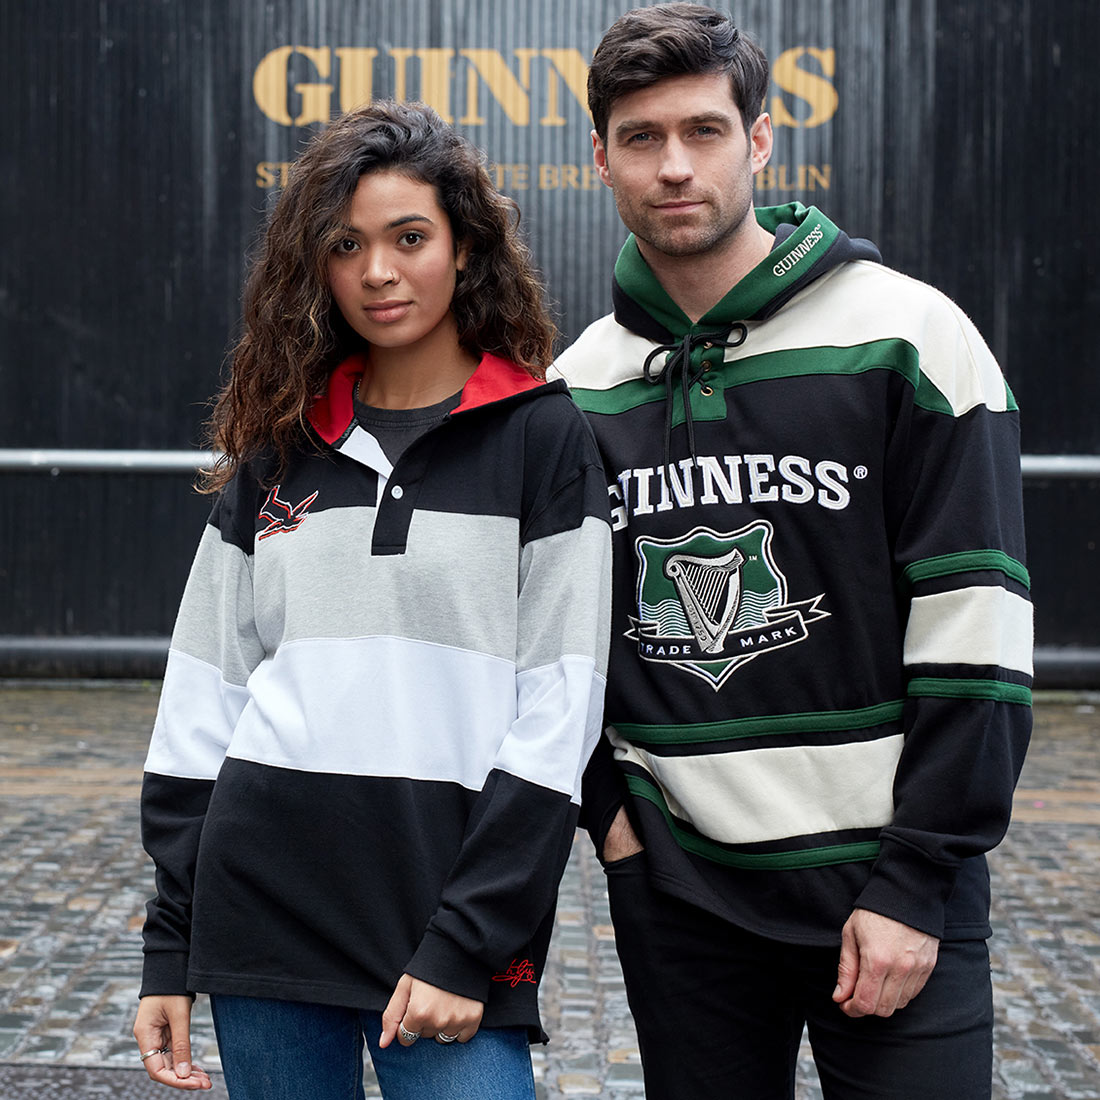 A man and a woman, wearing Guinness Black & Red Toucan Hooded Rugby jerseys, are standing in front of a Guinness sign.